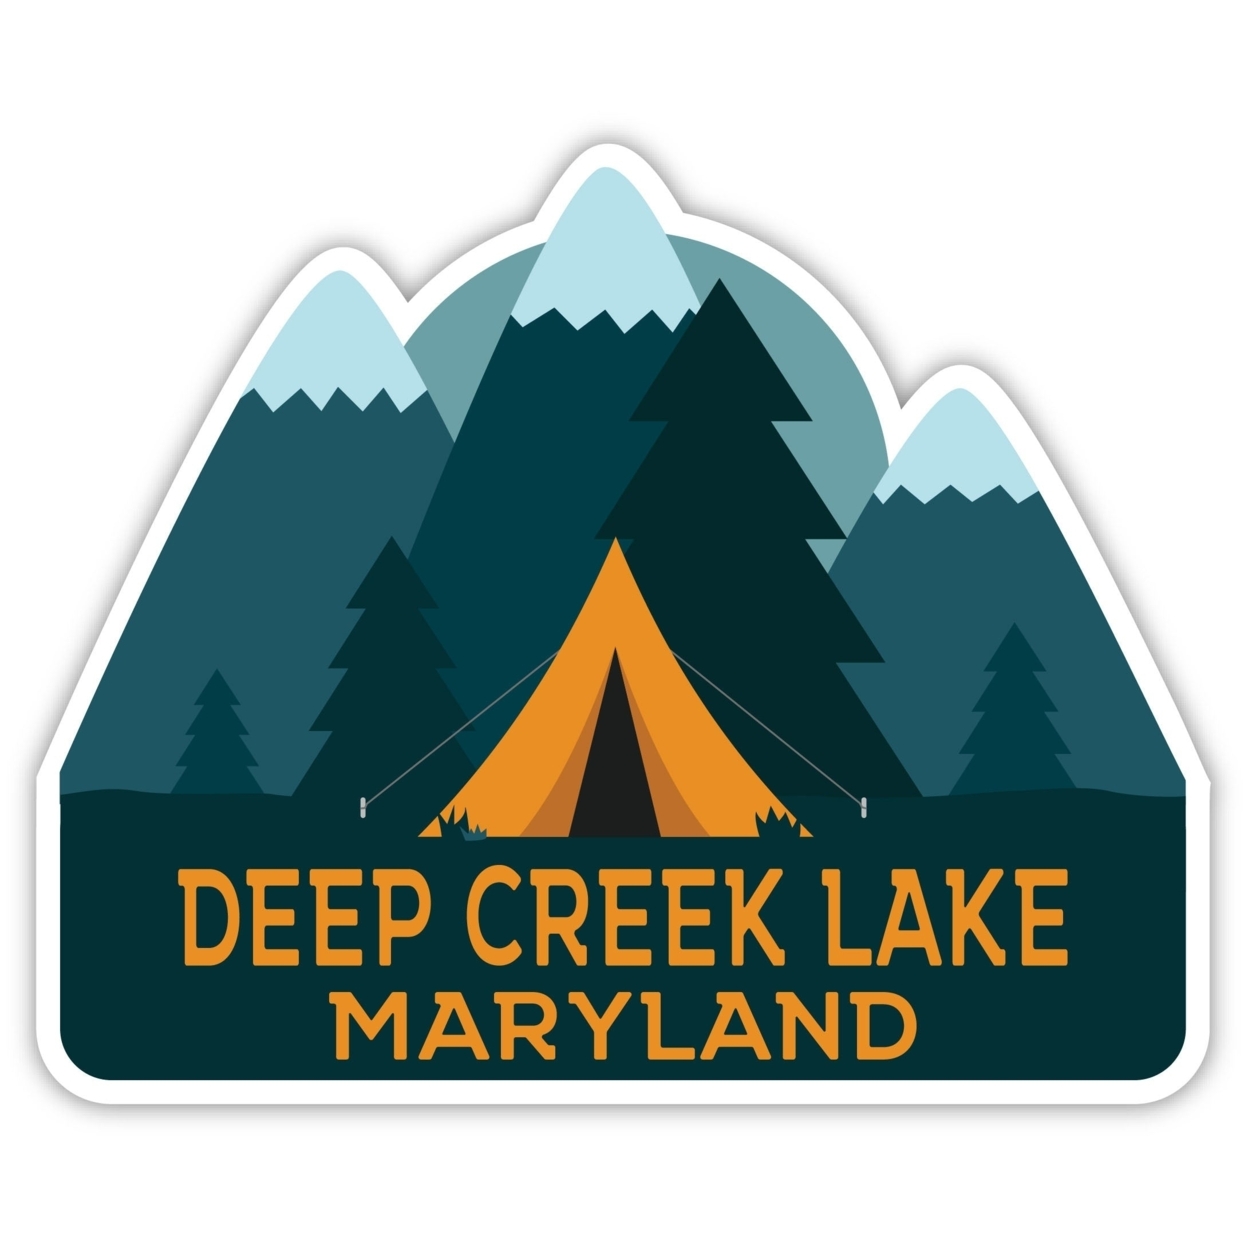 Deep Creek Lake Maryland Souvenir Decorative Stickers (Choose Theme And Size) - 4-Pack, 4-Inch, Tent